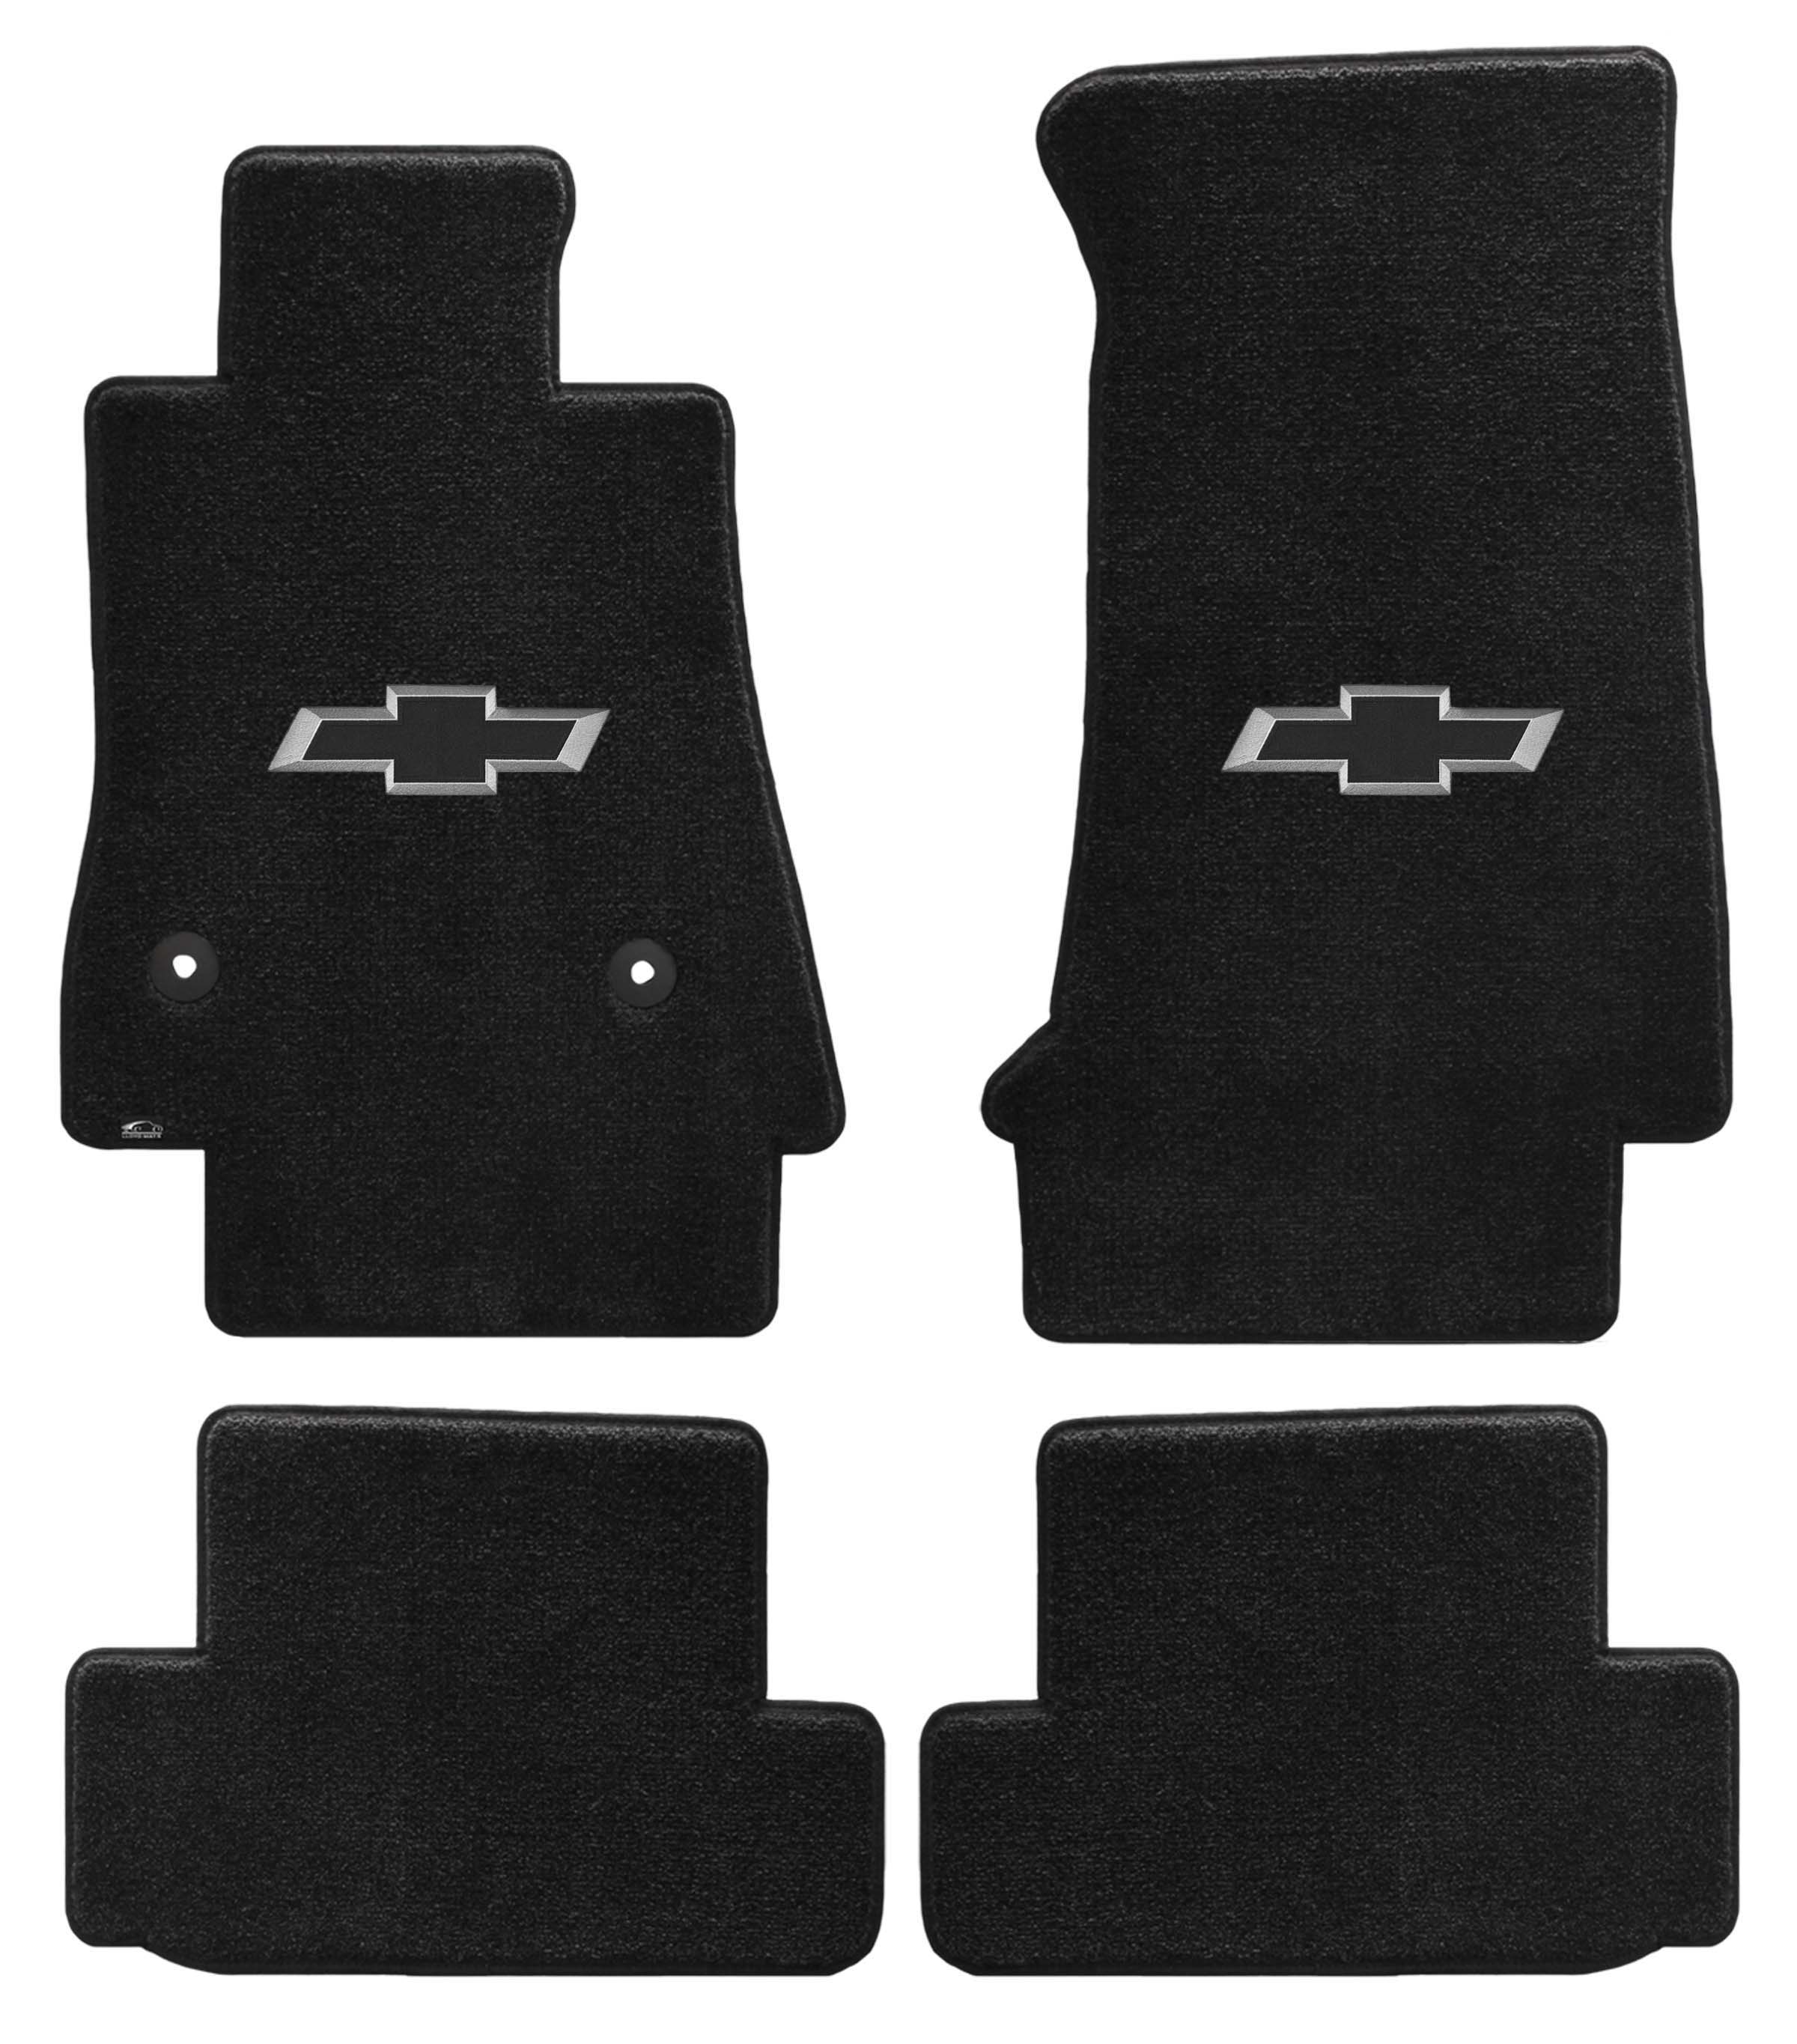 2016+ Camaro Lloyds Ultimat Floor Mats, Front and Rear Pairs with 6th Gen Black Bowtie Logo